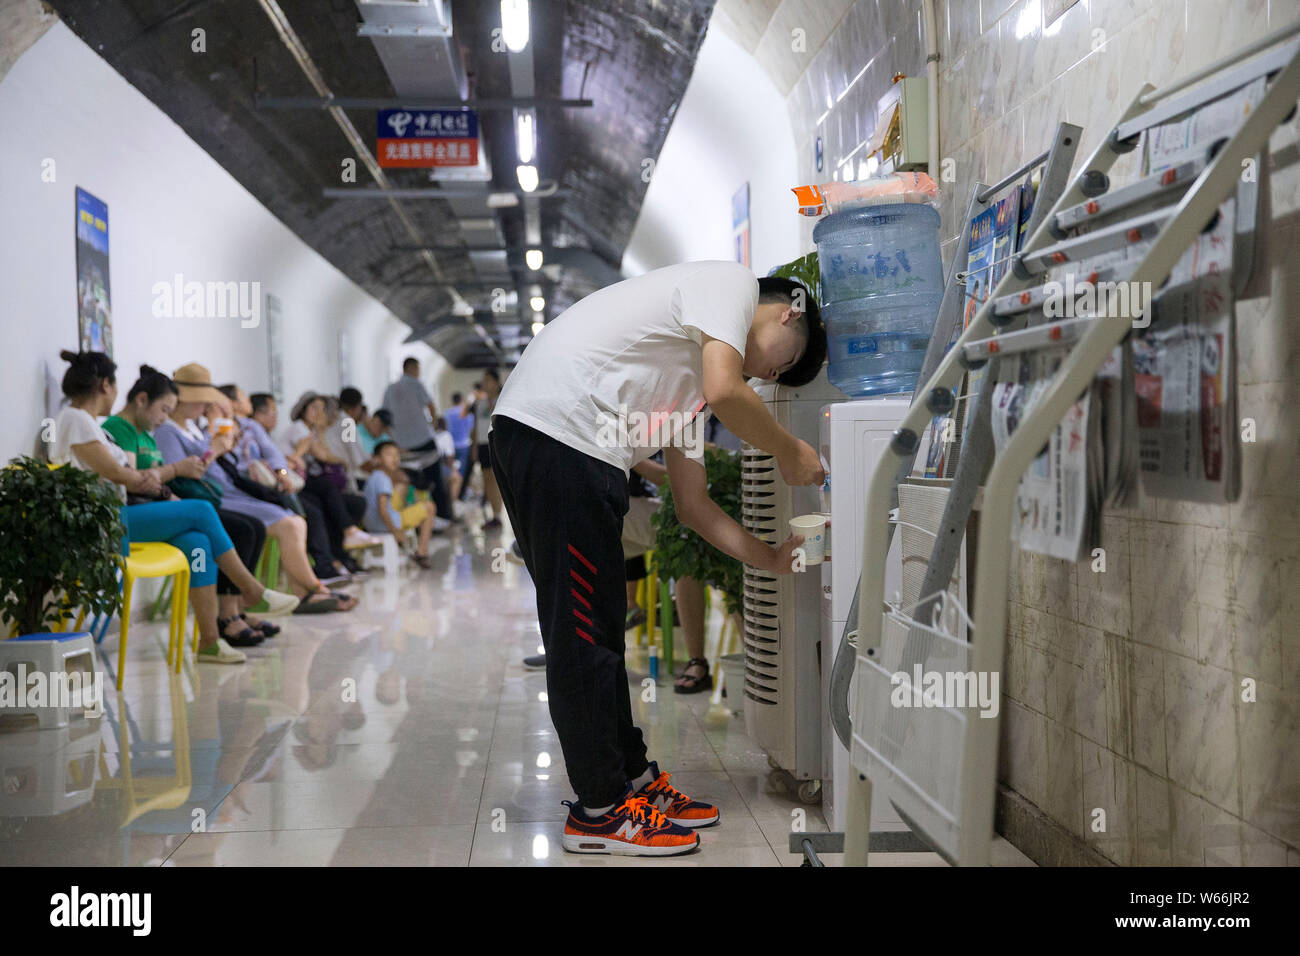 Local residents enjoy themselves in an air-raid shelter to escape summer heat in Nanjing city, east China's Jiangsu province, 15 July 2018.    Residen Stock Photo